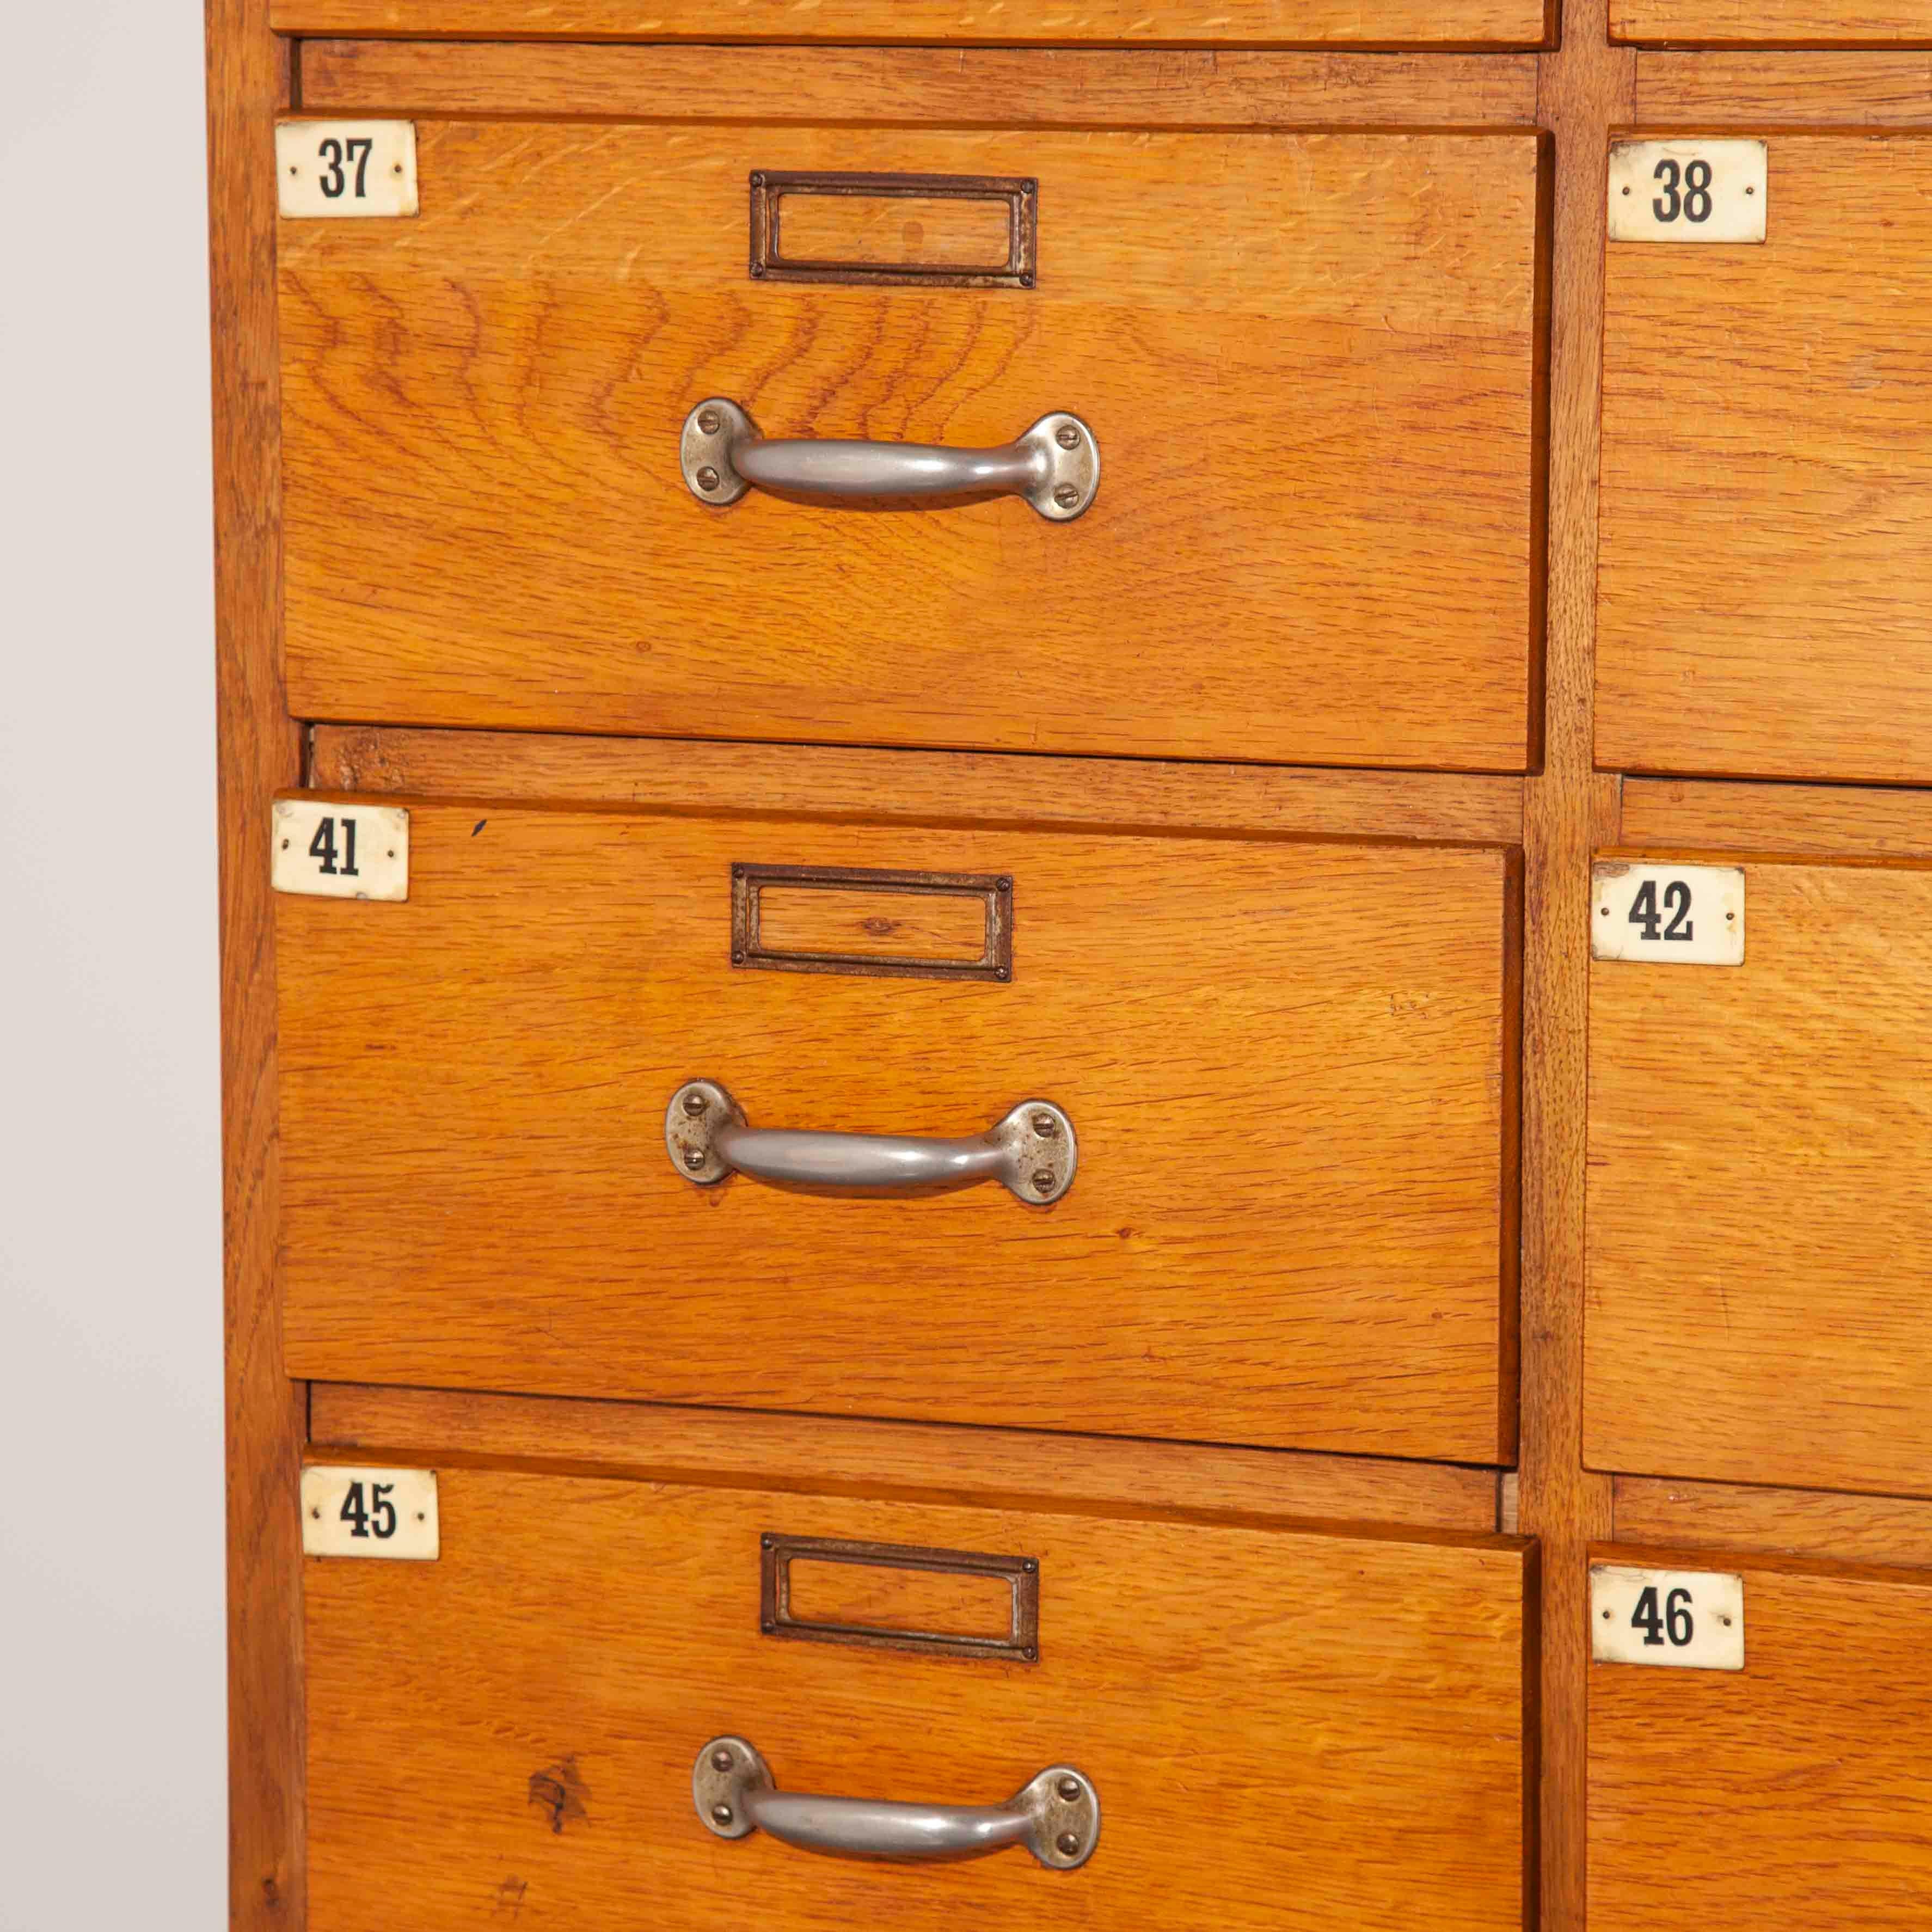 1950s oak apothecary multi drawer chest of drawers – Thirty two drawers – Unit one
1950s oak apothecary multi drawer chest of drawers – thirty two drawers. (Unit One).
One of our favourite ever finds this is an exceptional unit with great